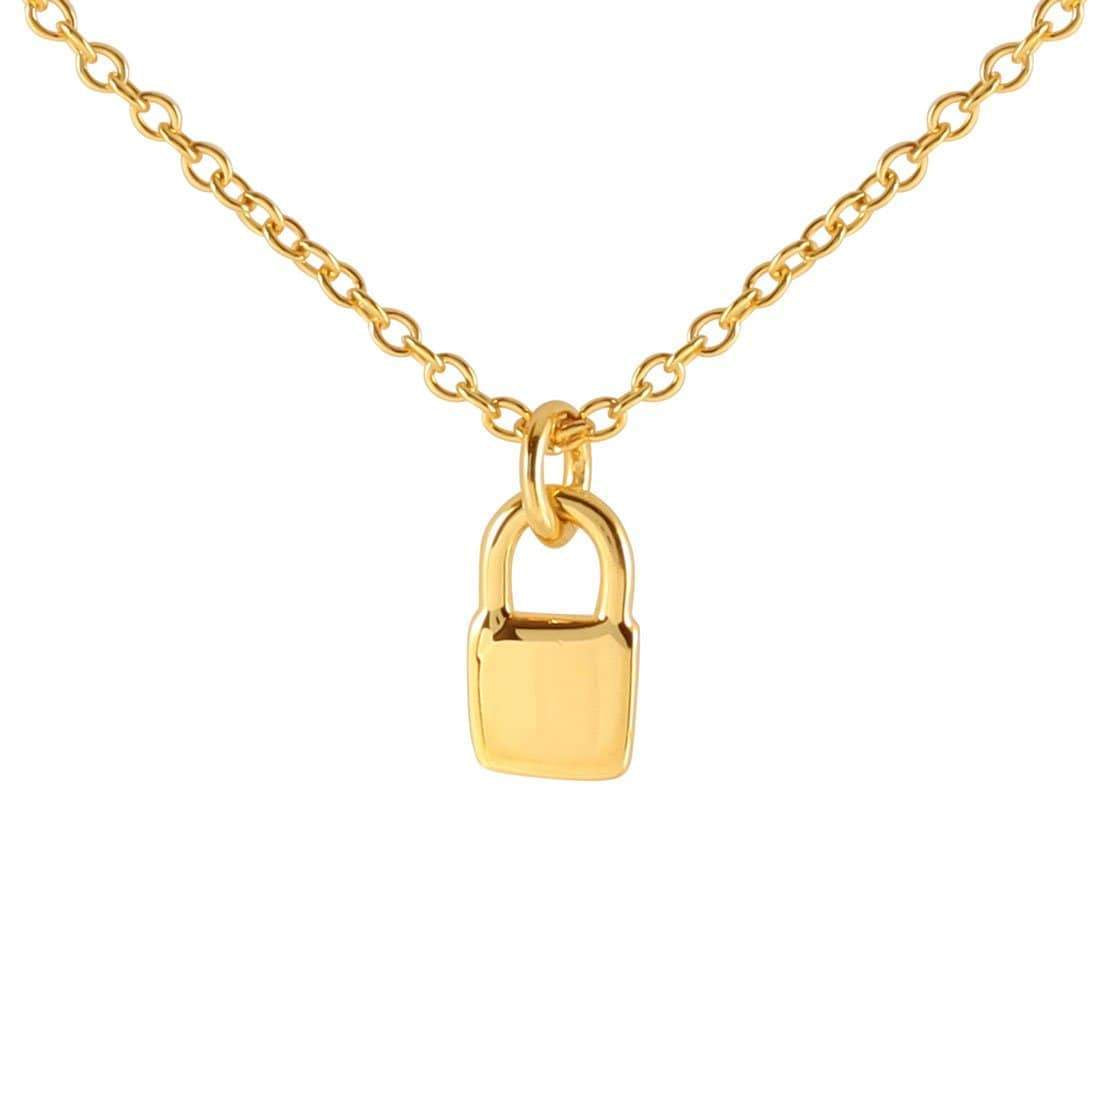 Lock Necklace - Gold